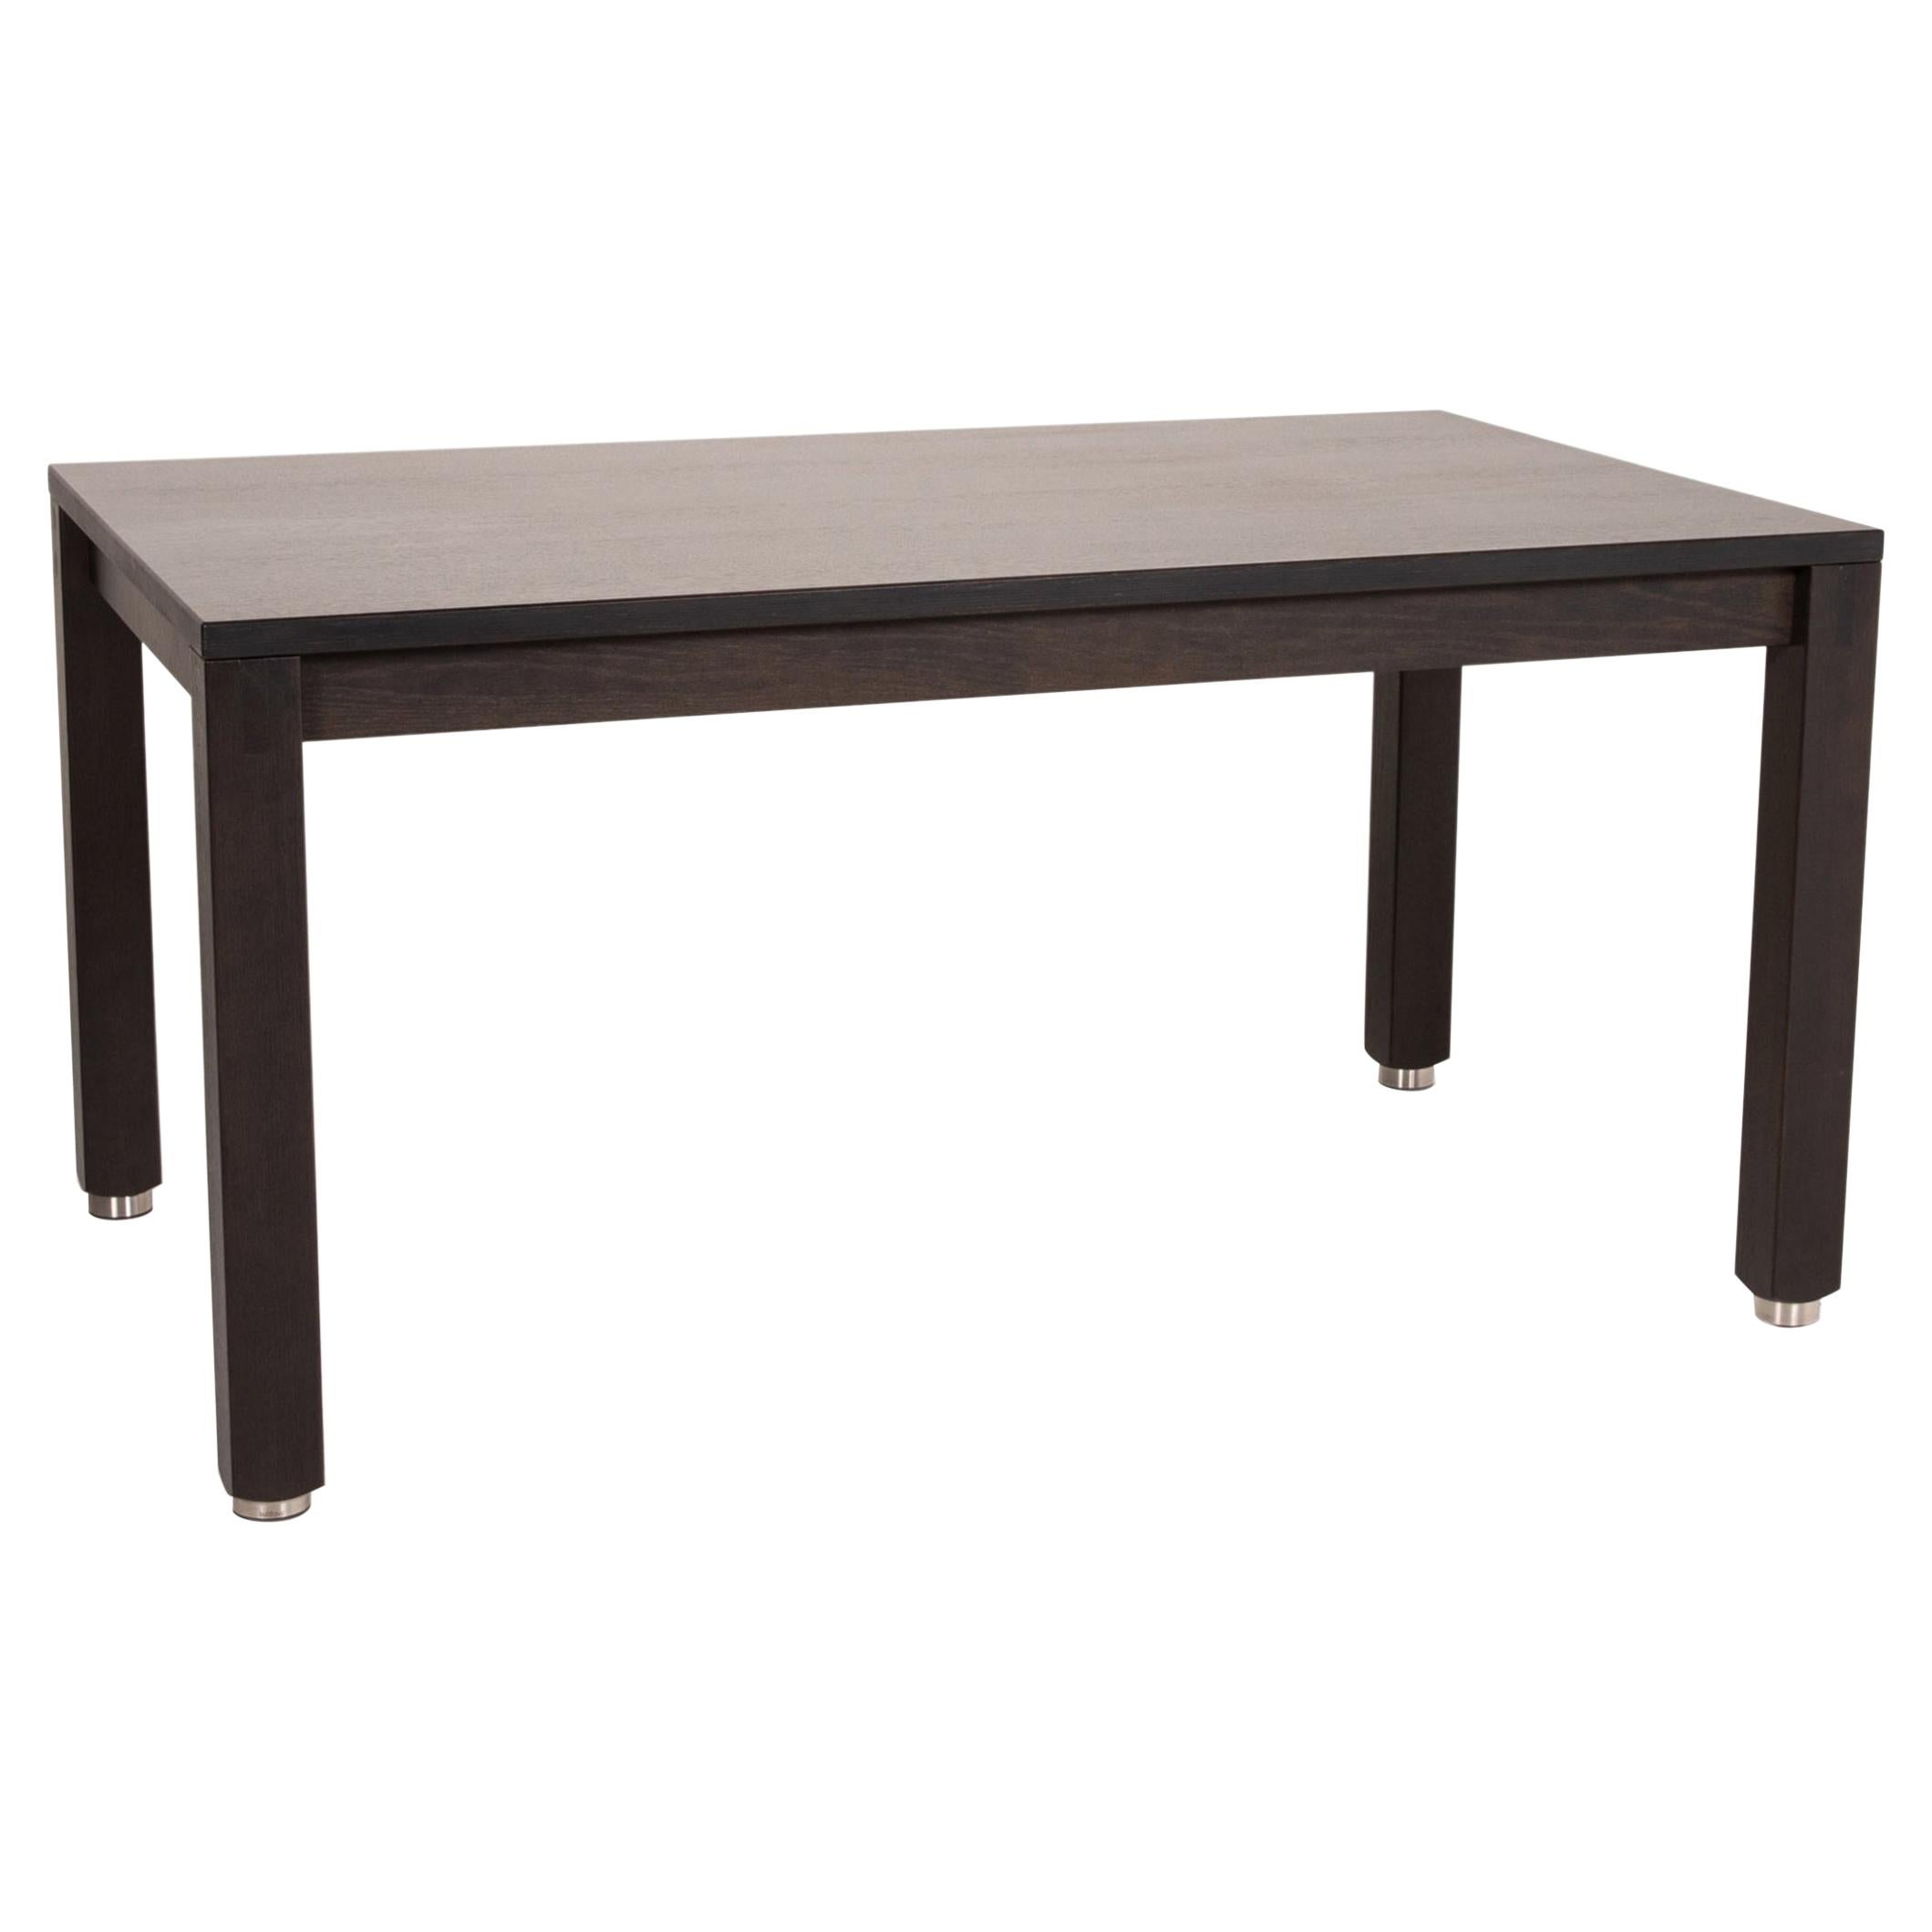 Bulthaup Corpus Dining Table Dark Brown Brown Table For Sale